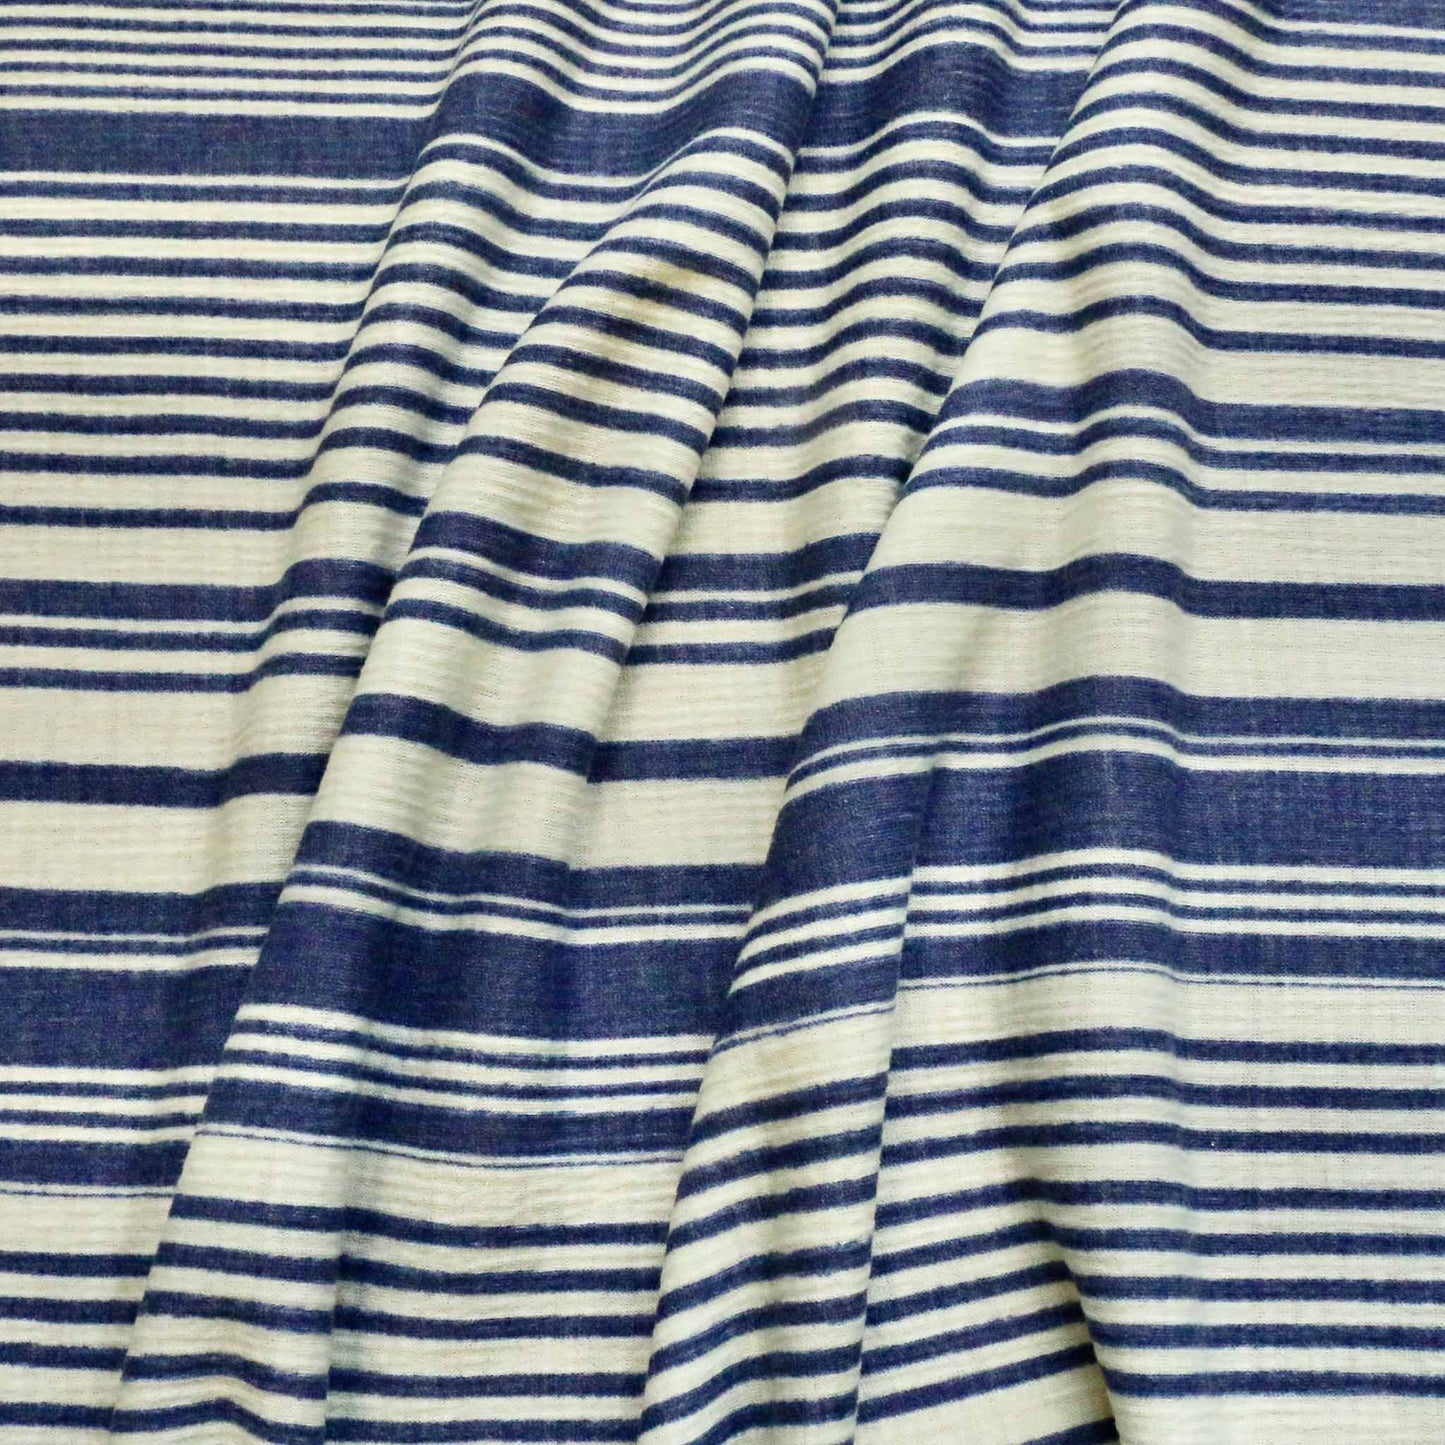 viscose jersey knit dress fabric deadstock with stripe patter in blue and white